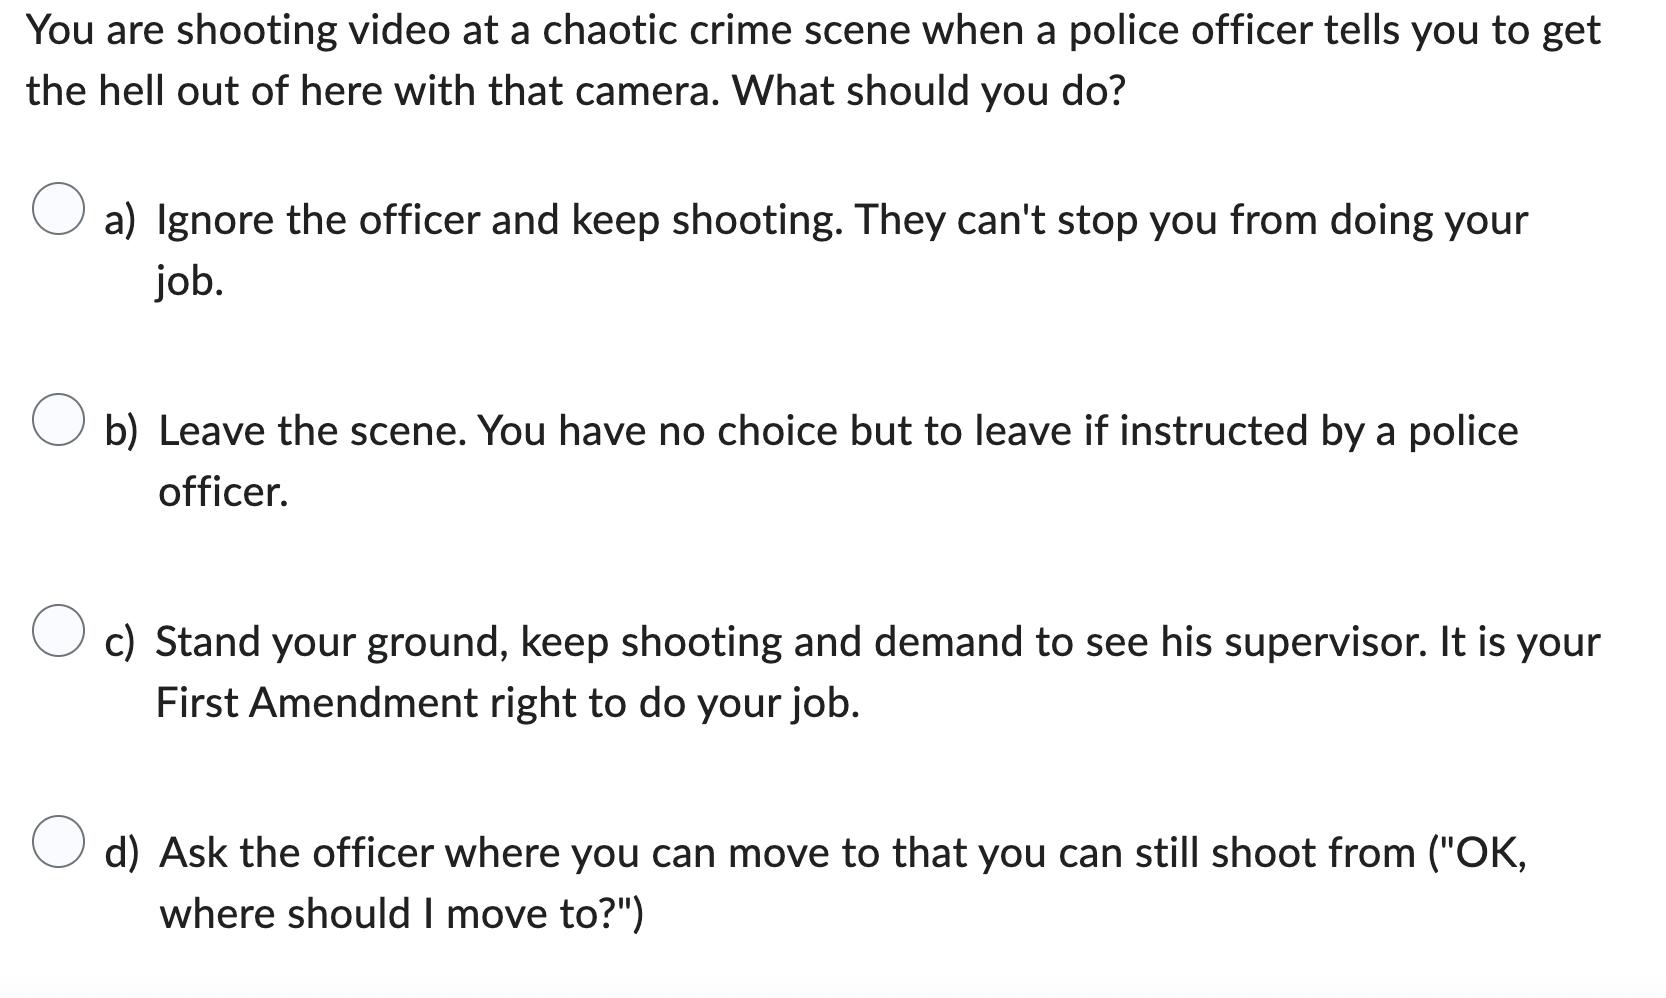 You are shooting video at a chaotic crime scene when a police officer tells you to get the hell out of here